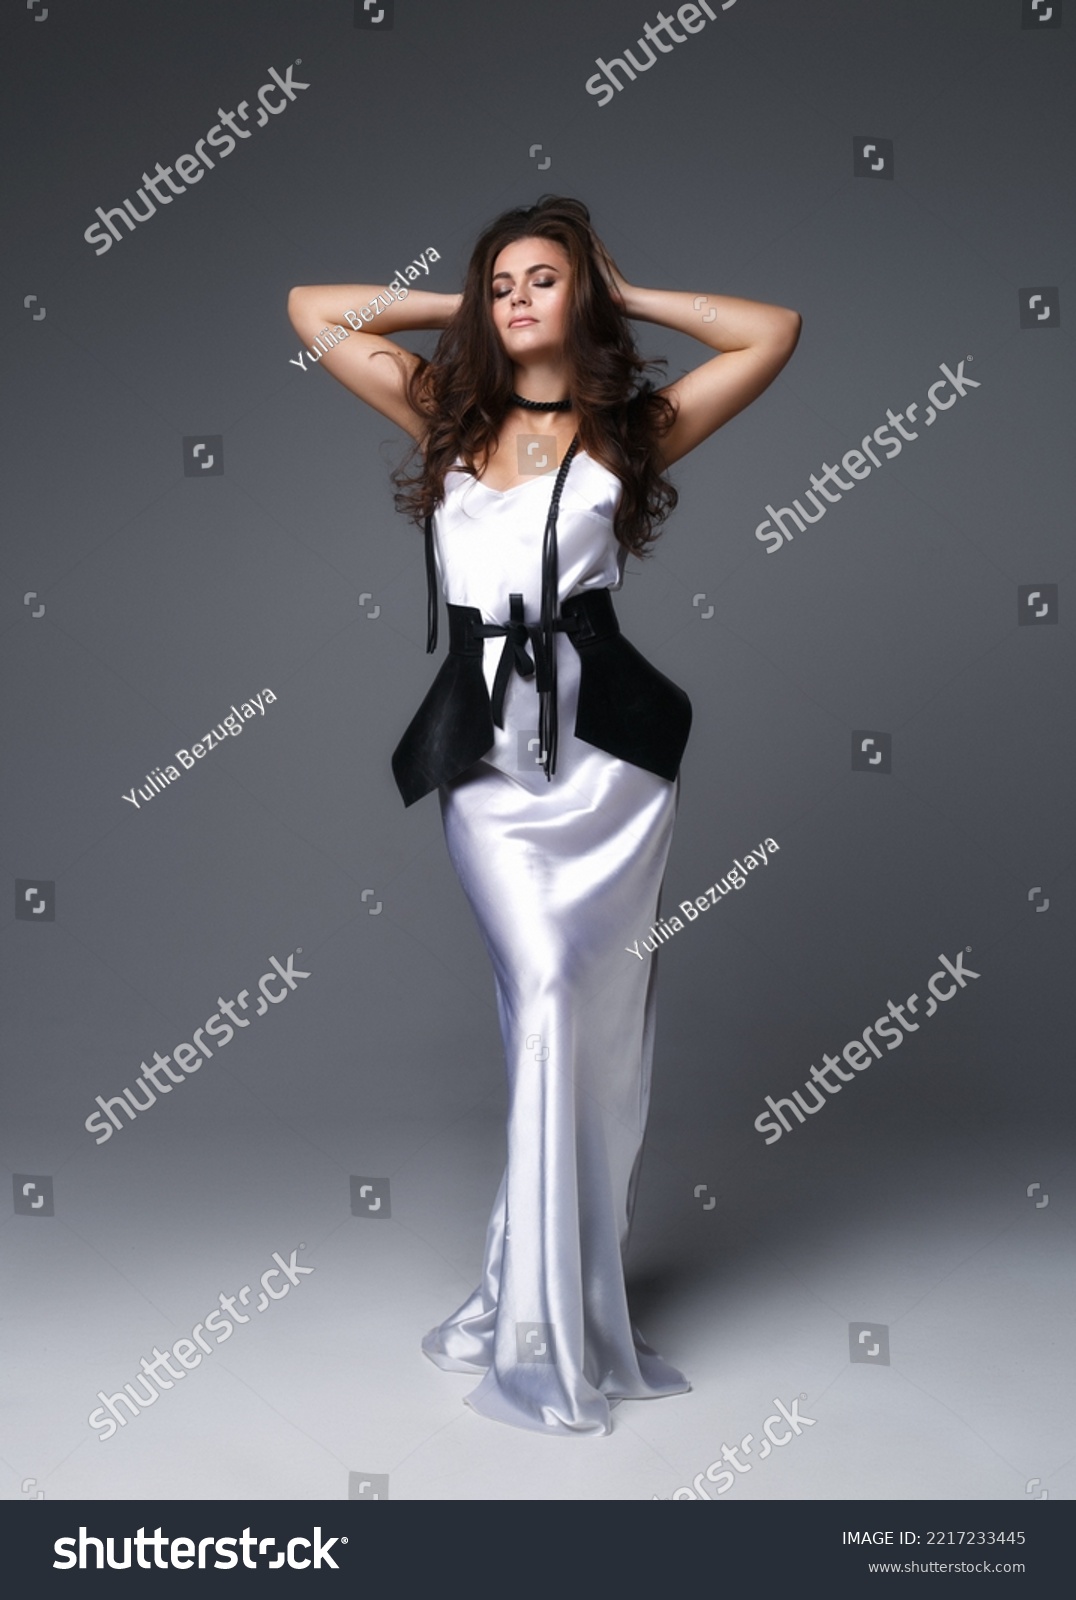 unusual interesting outfit for the bride, stylish outfit white long dress and black leather peplum on belt #2217233445